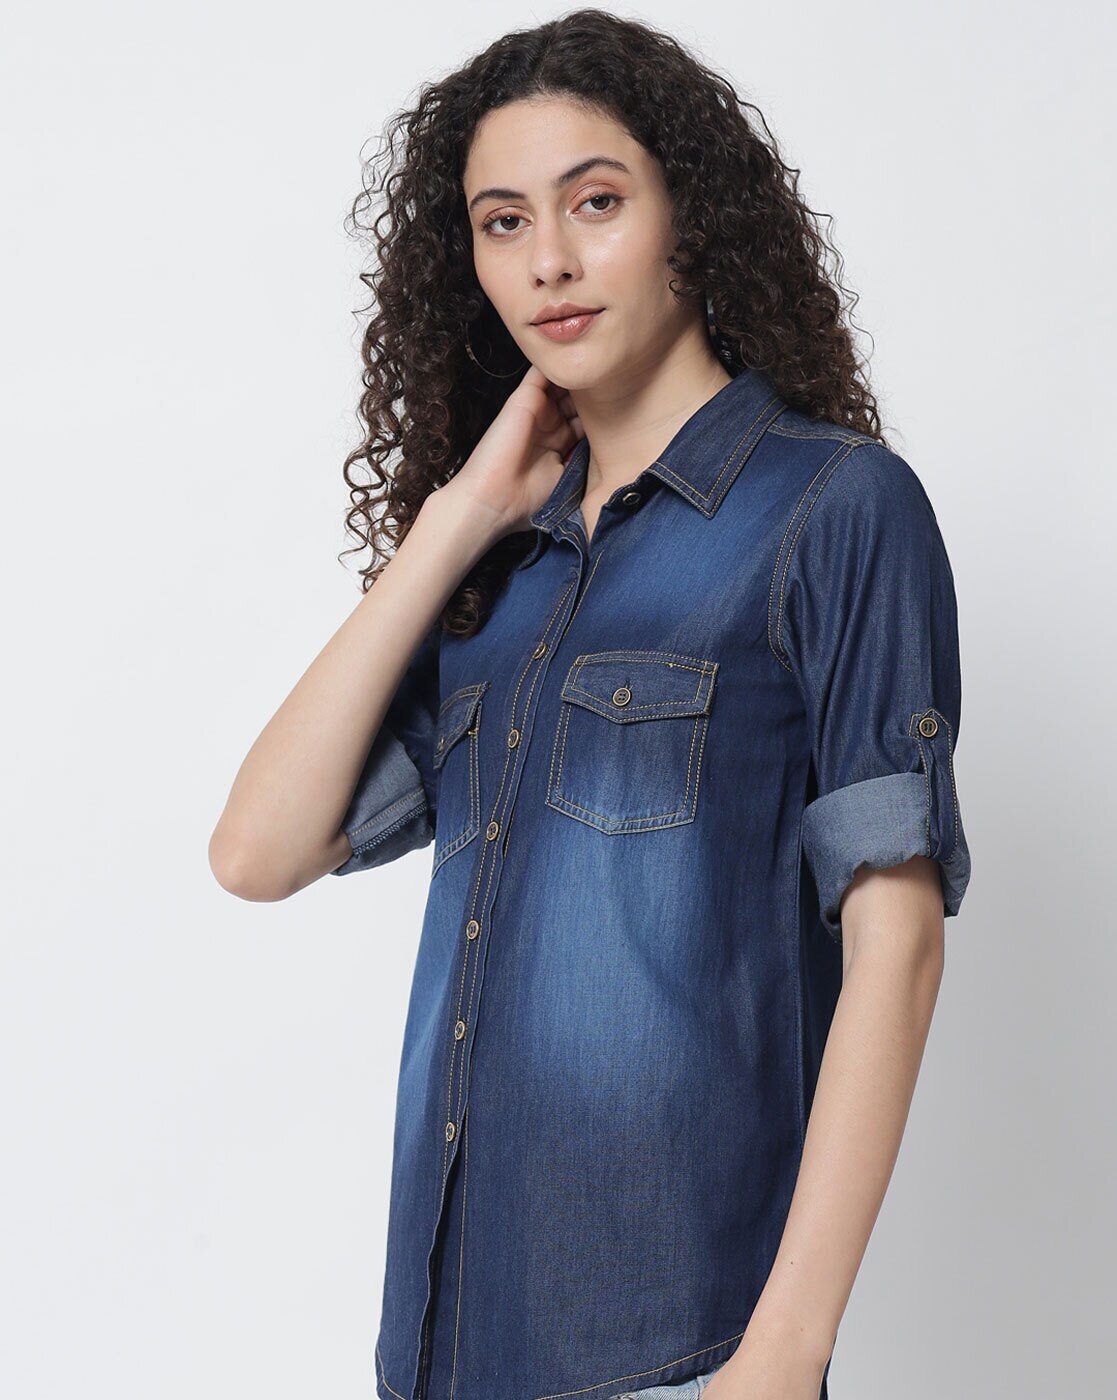 starfilled Women Washed Party Dark Blue Shirt - Buy starfilled Women Washed  Party Dark Blue Shirt Online at Best Prices in India